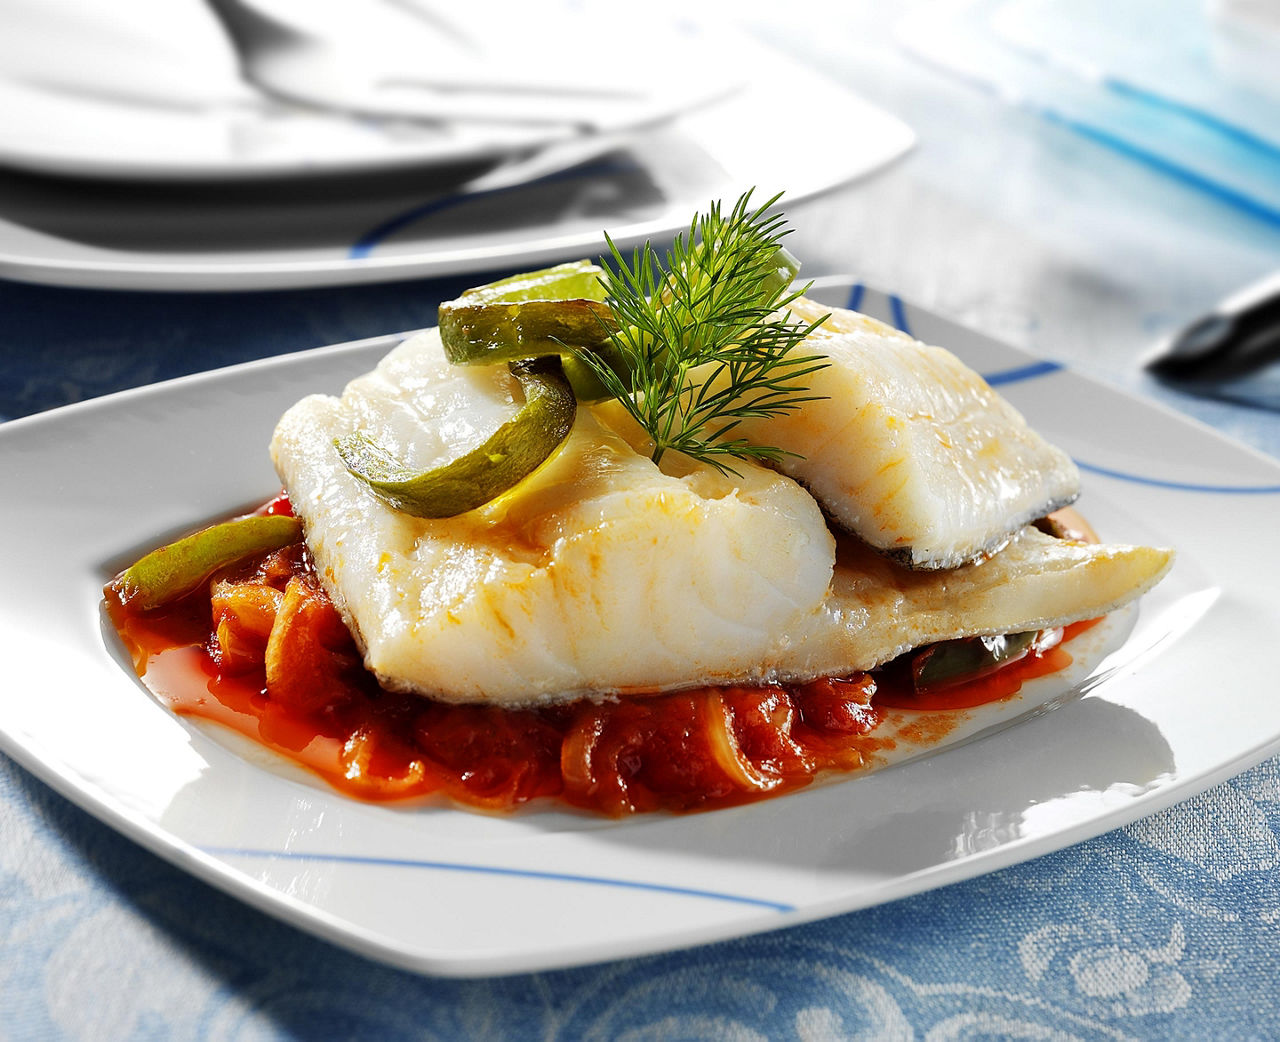 A Filet of Cod with Side Dished, Bilbao, Spain